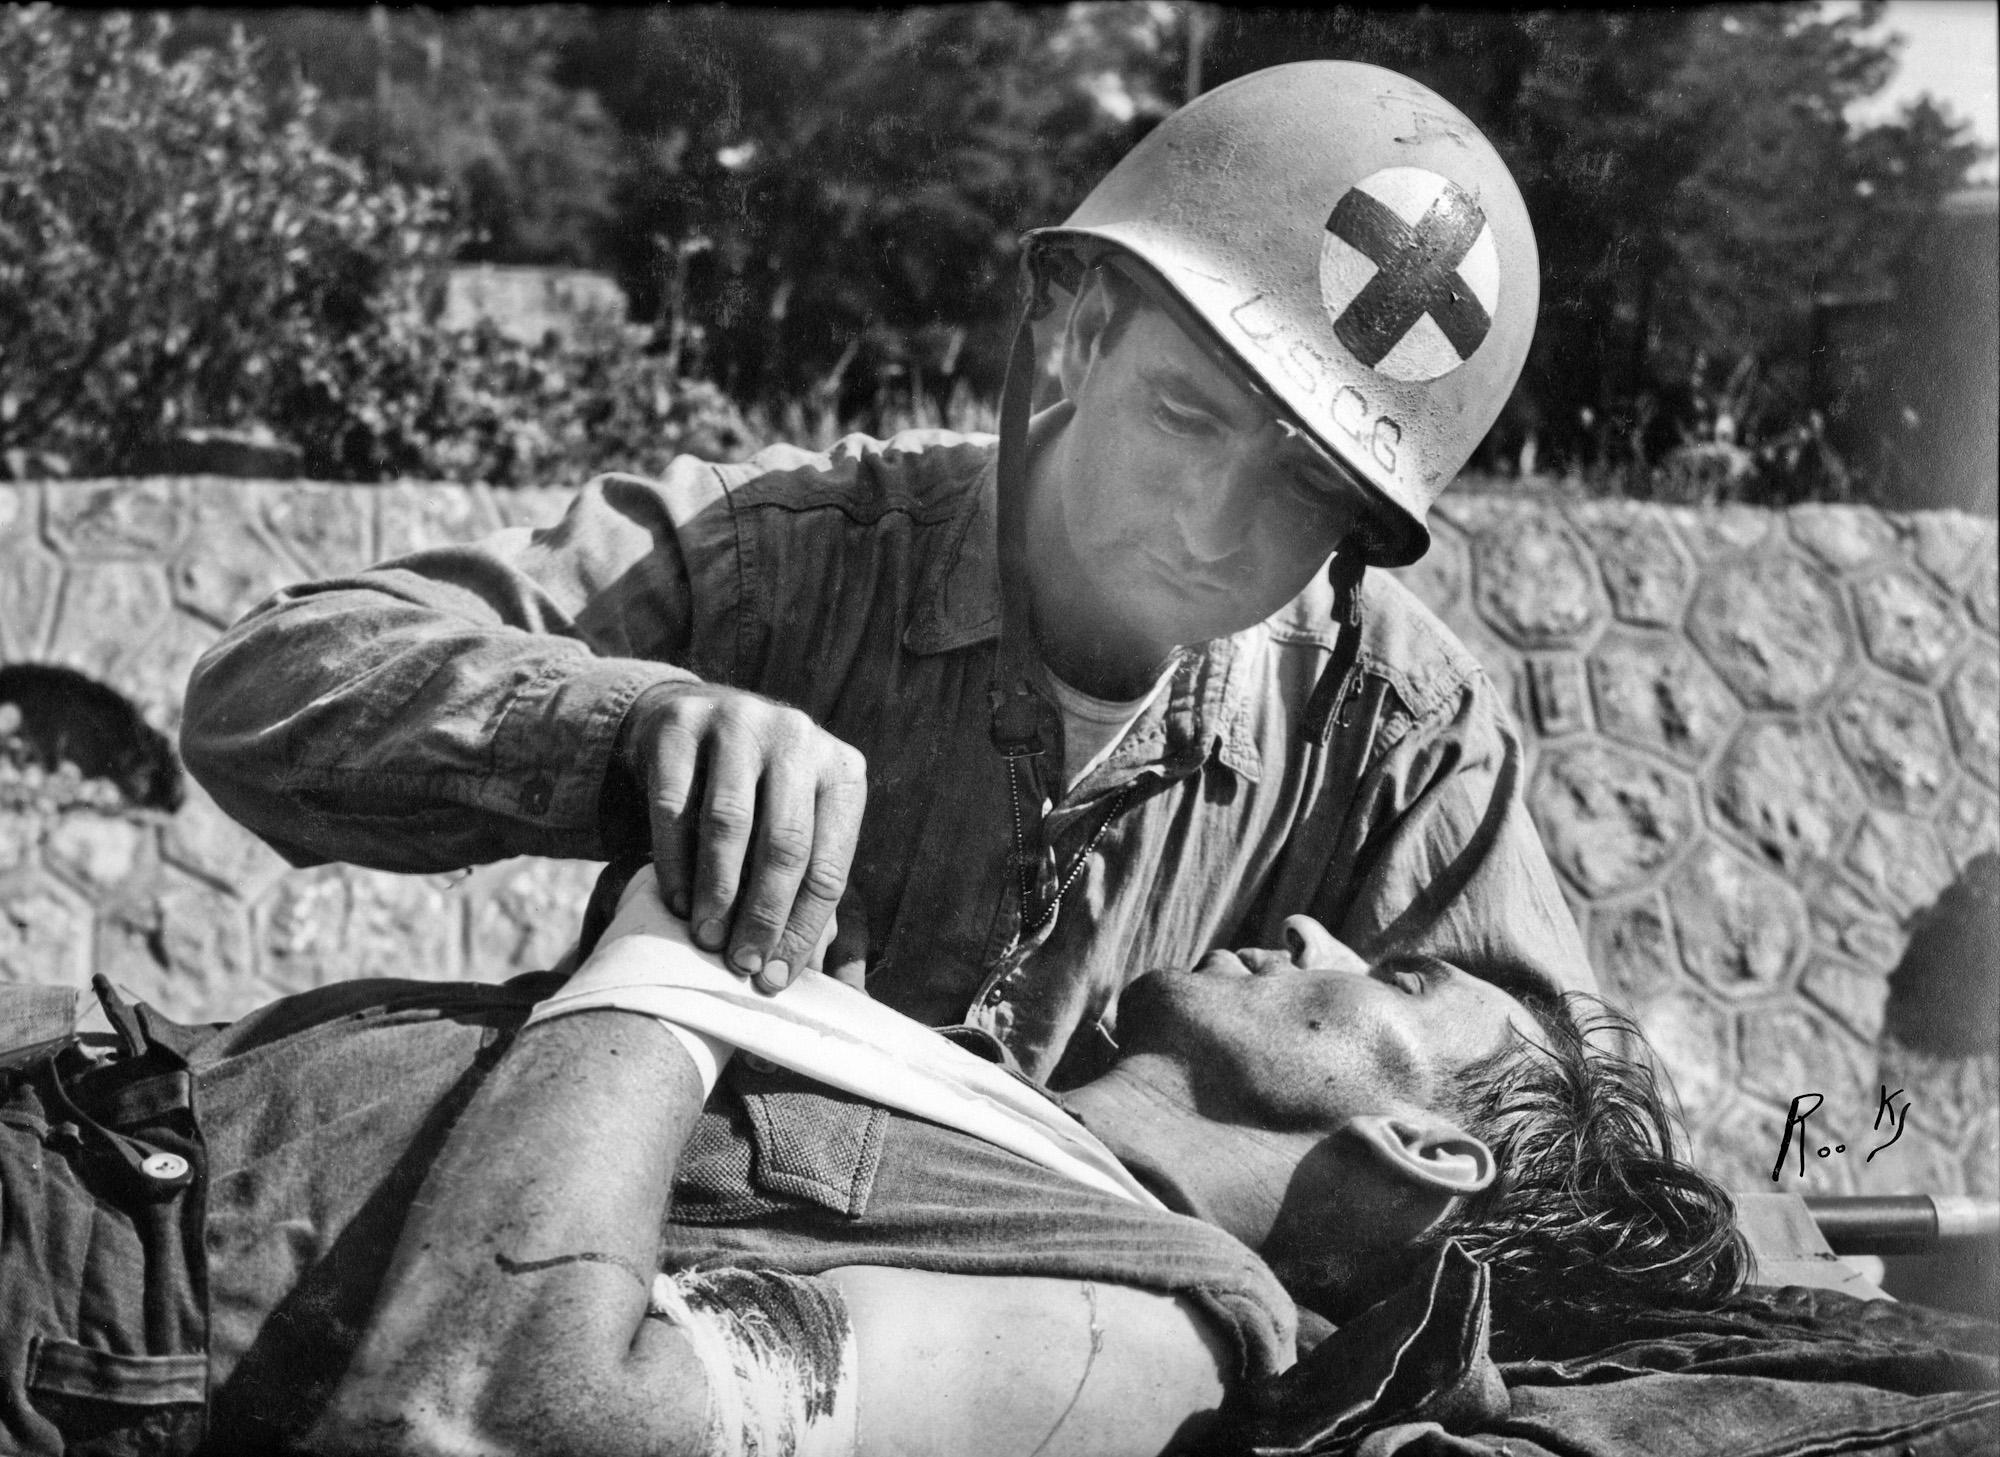 In this image, my grandfather John "Jack" Baker can be seen treating a captured German soldier. It is believed that this image was taken in Southern France – possibly near Baie de Cavalaire. Although the exact date isn’t known, it is likely that the event took place from August 15, 1944 to September 10, 1944. This image was taken by Dale Rooks, and may have been featured in a news magazine at the time. The date estimate is based on the official history of the USCG USS Duane, which Baker and Rooks were both assigned to. View full size.